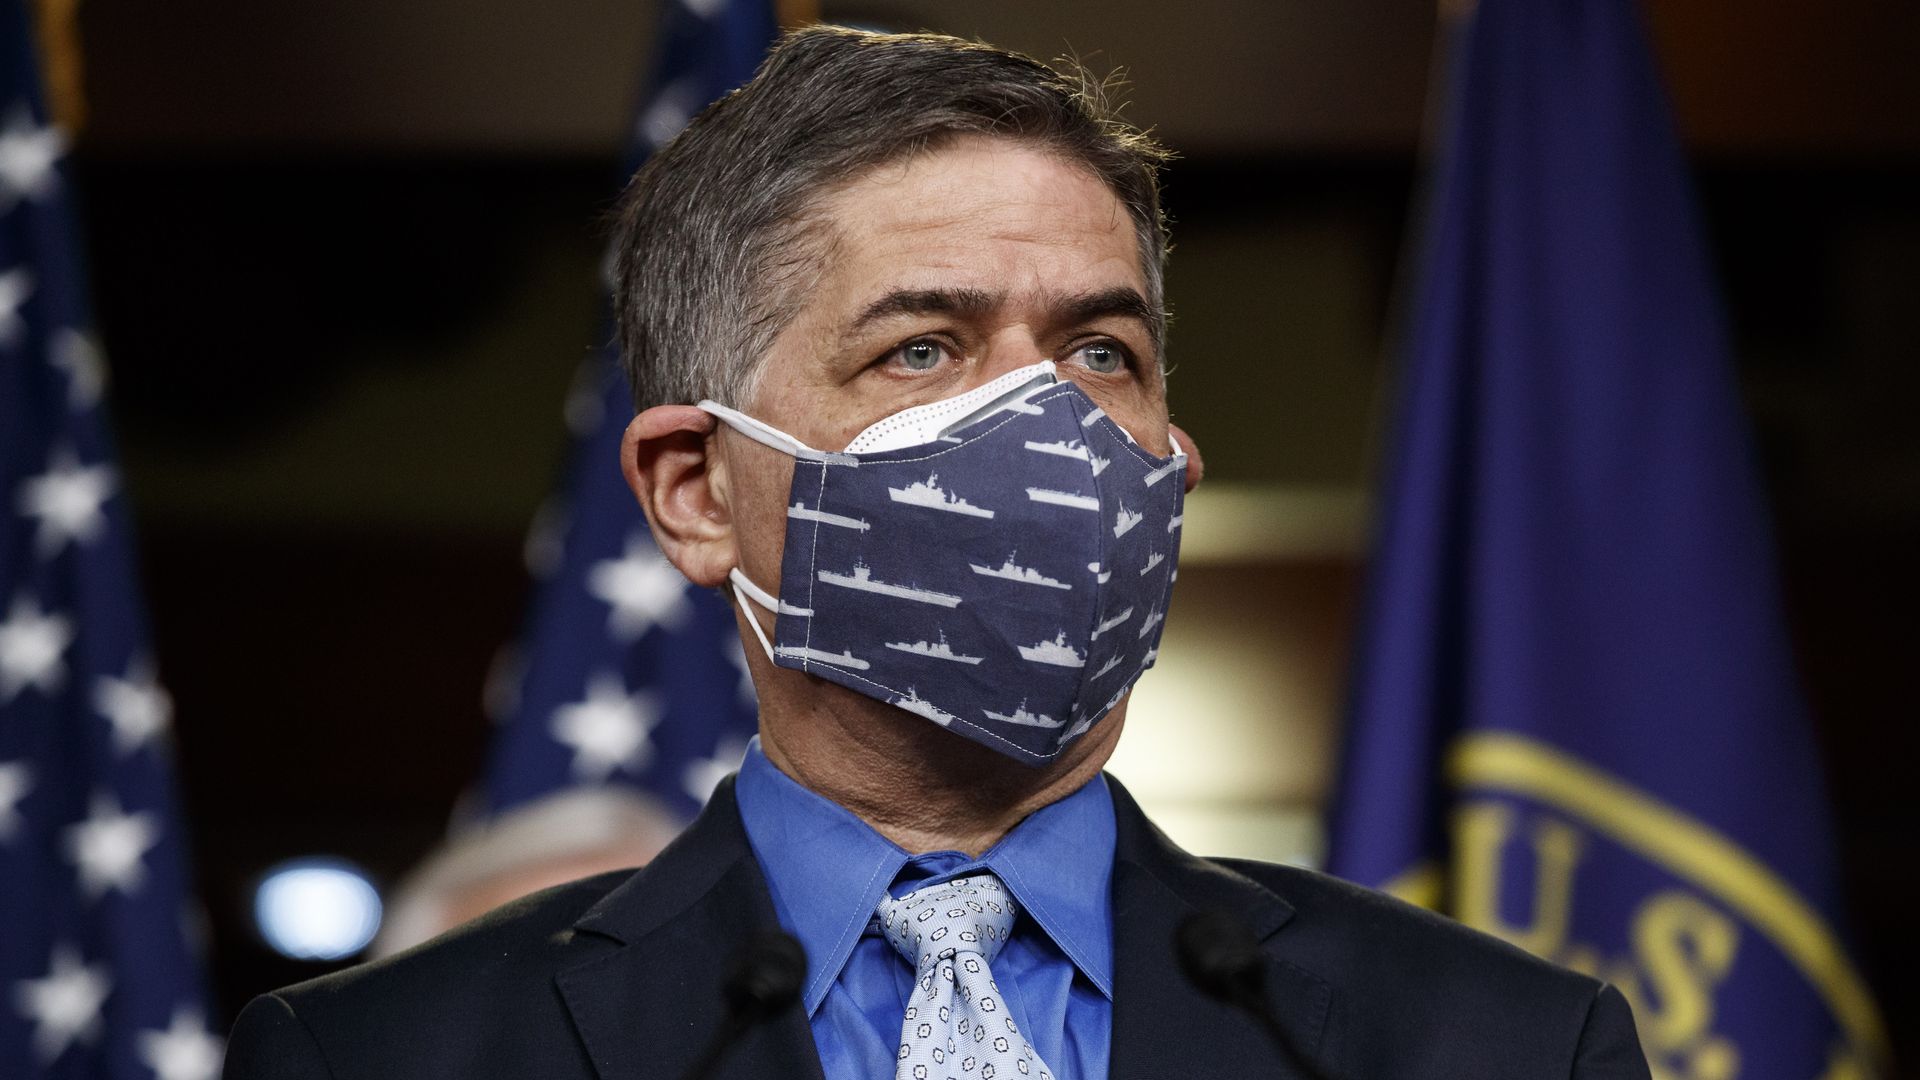 Rep, Filemon Vela is seen wearing a COVID mask as he participates in a news conference.